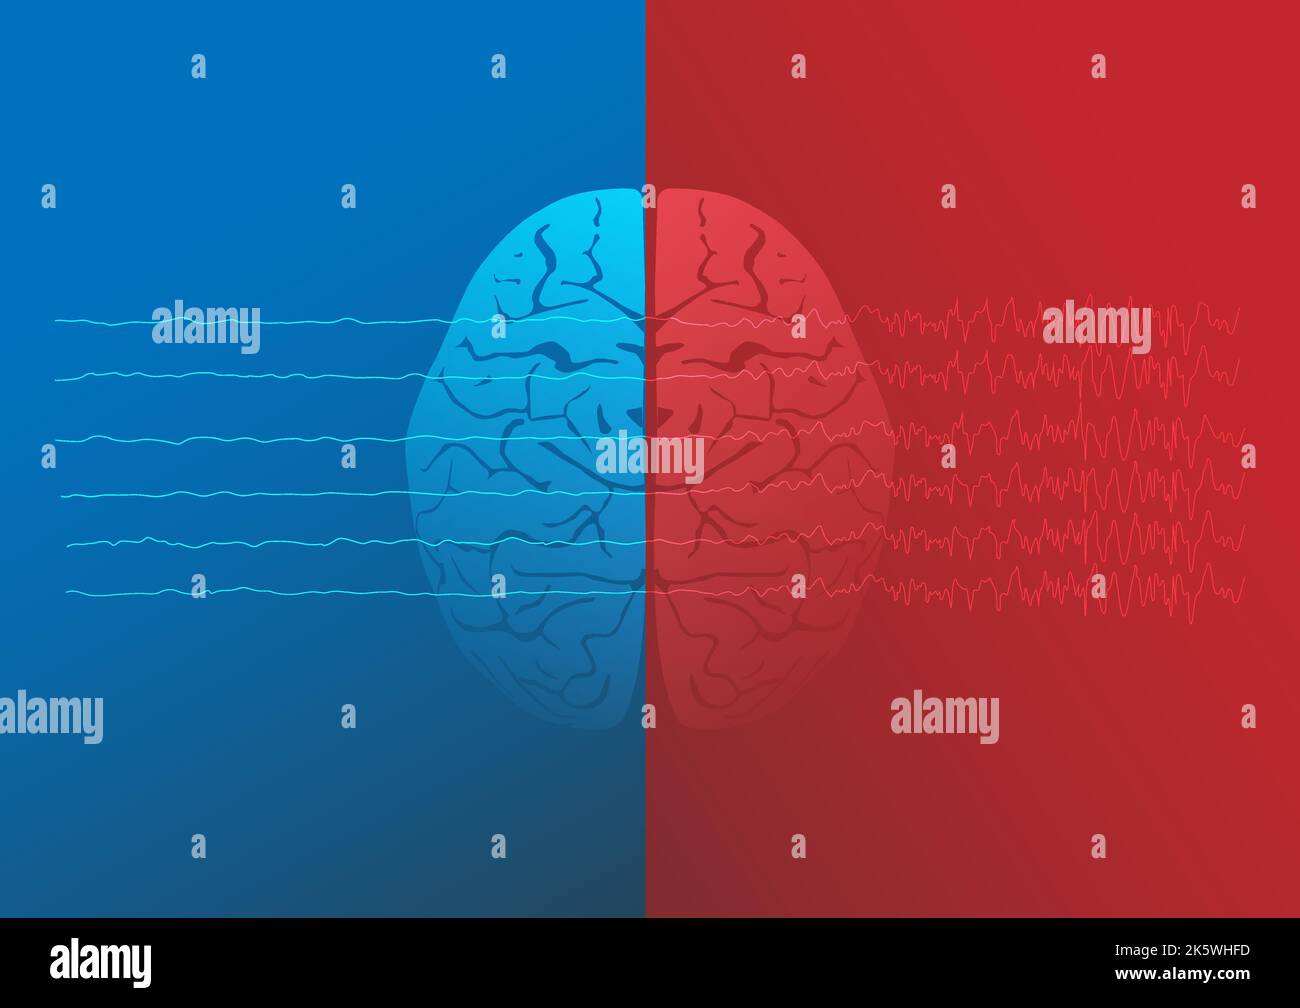 Illustration of human normal brain and epileptic brain. Brain waves of focal seizure. Stock Vector